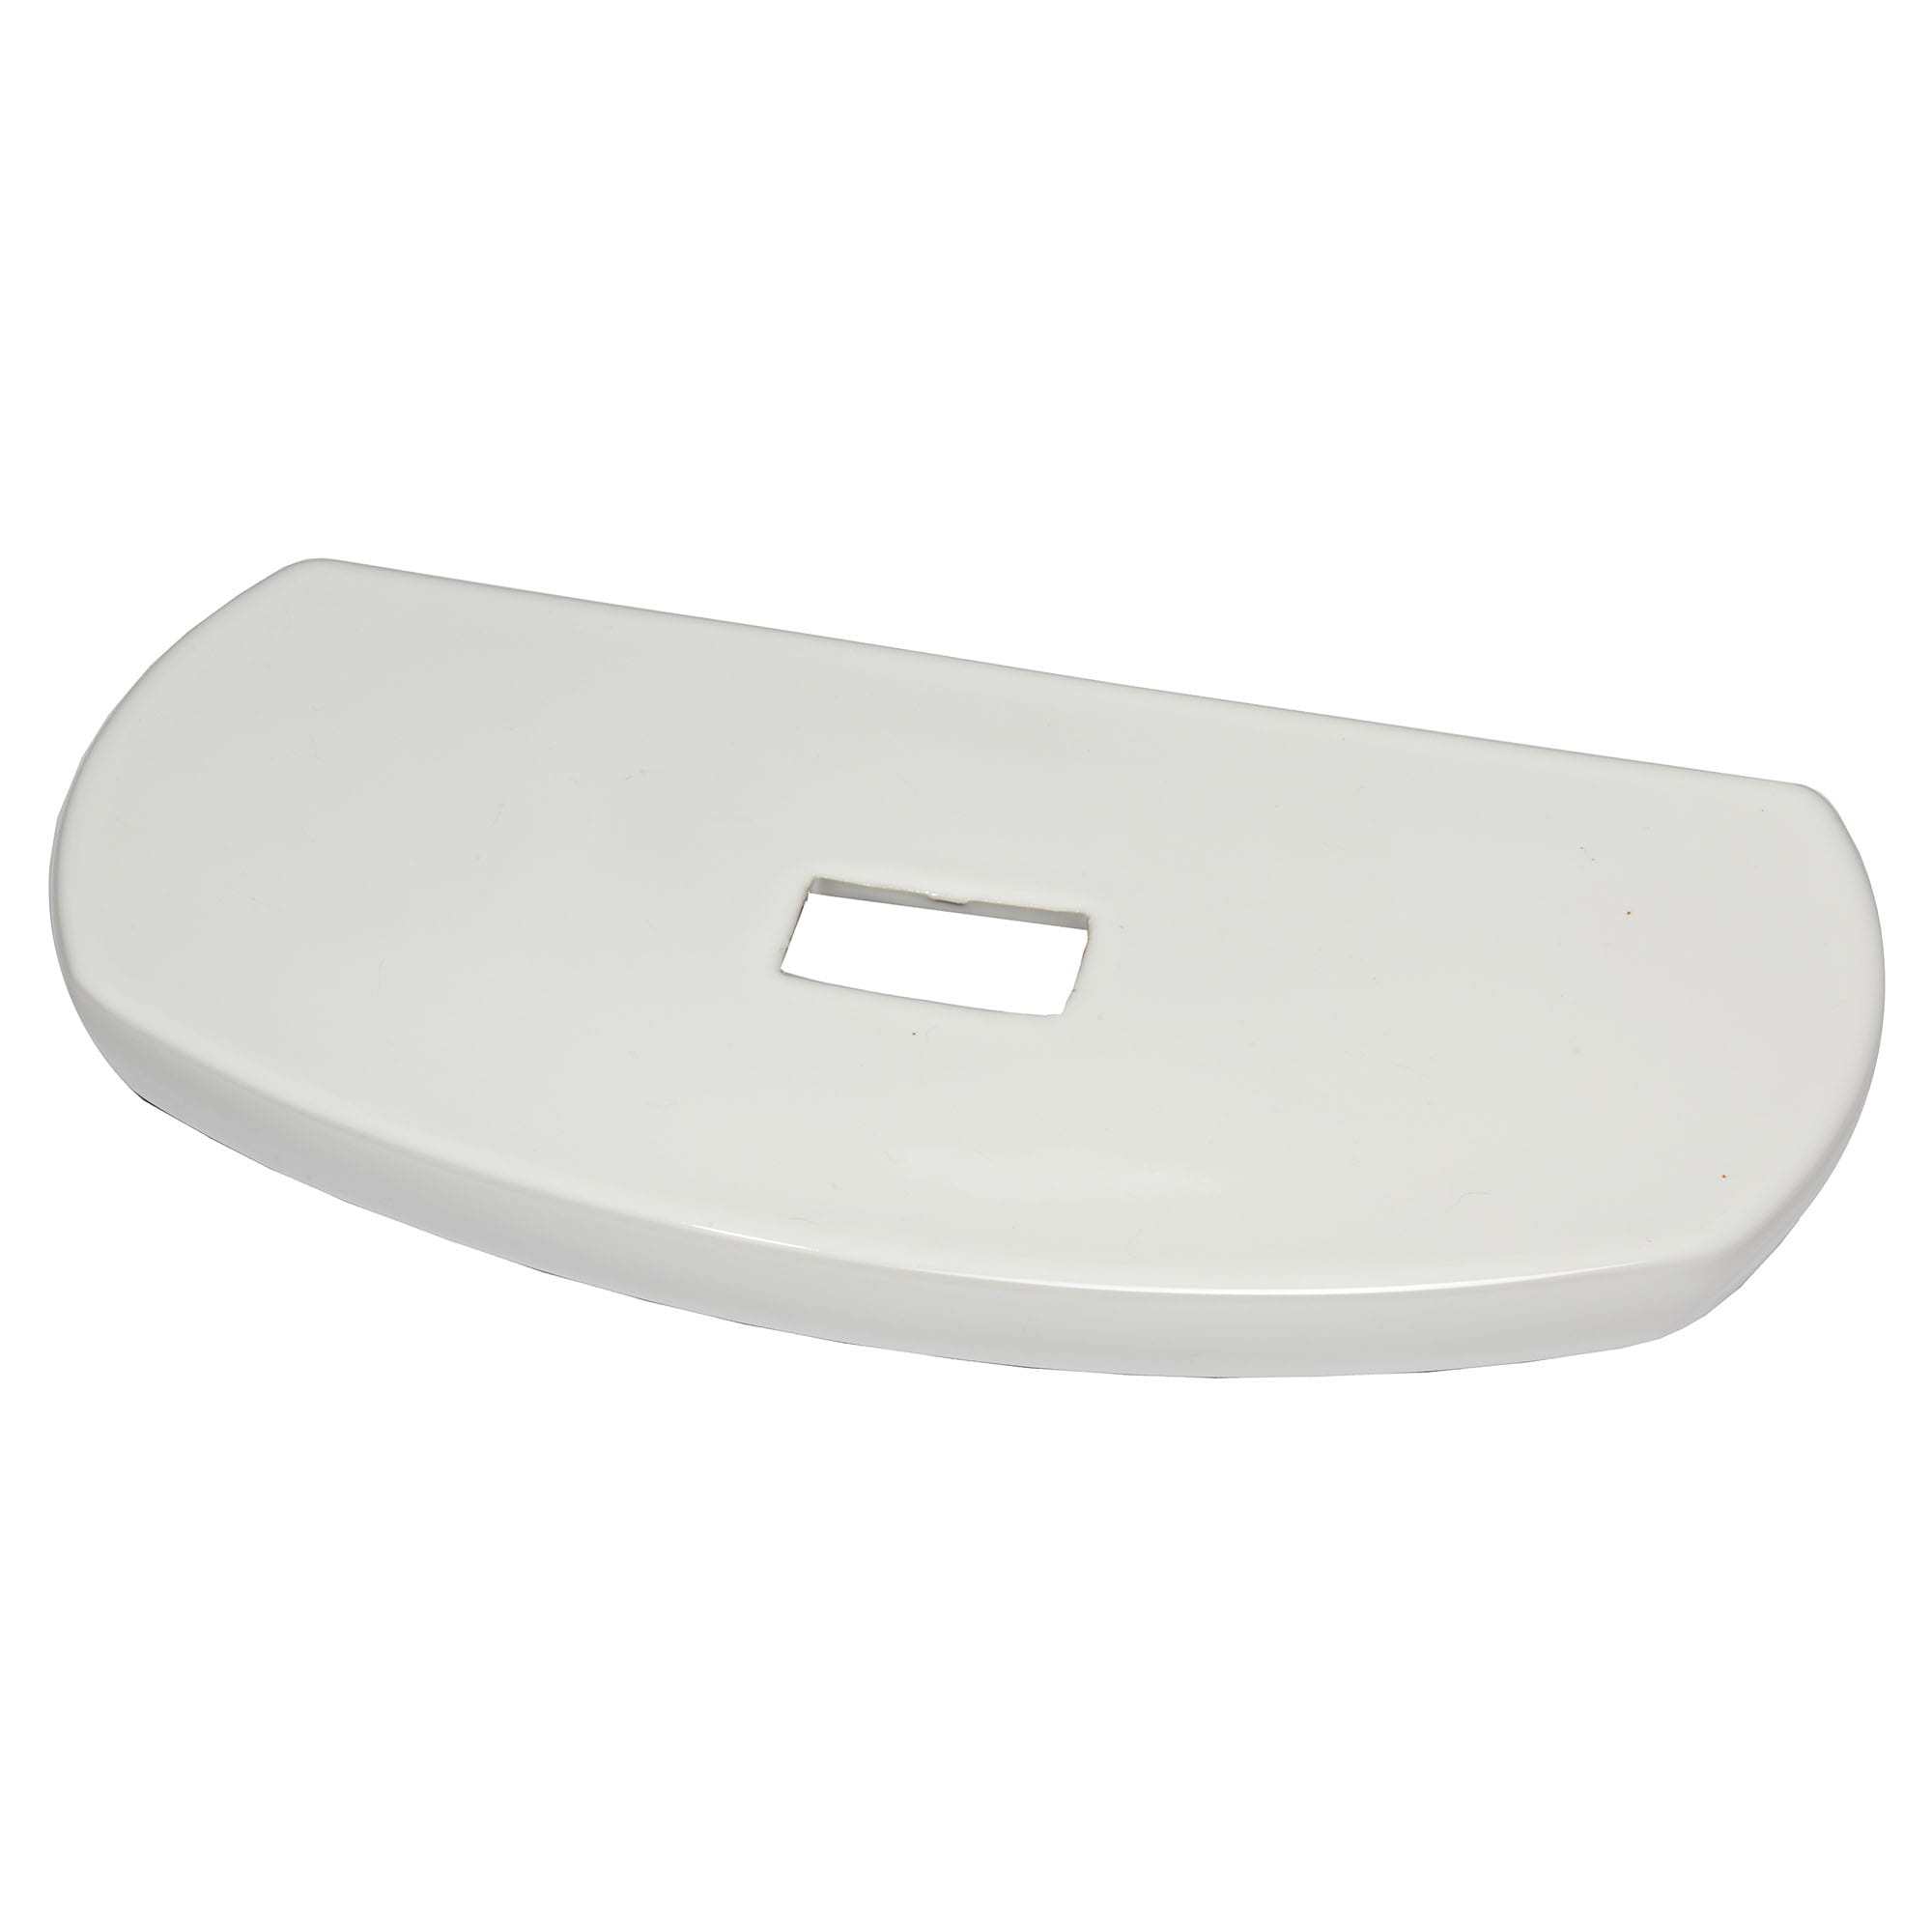 Edgemere® Dual Flush 12 in. Rough Toilet Tank Cover